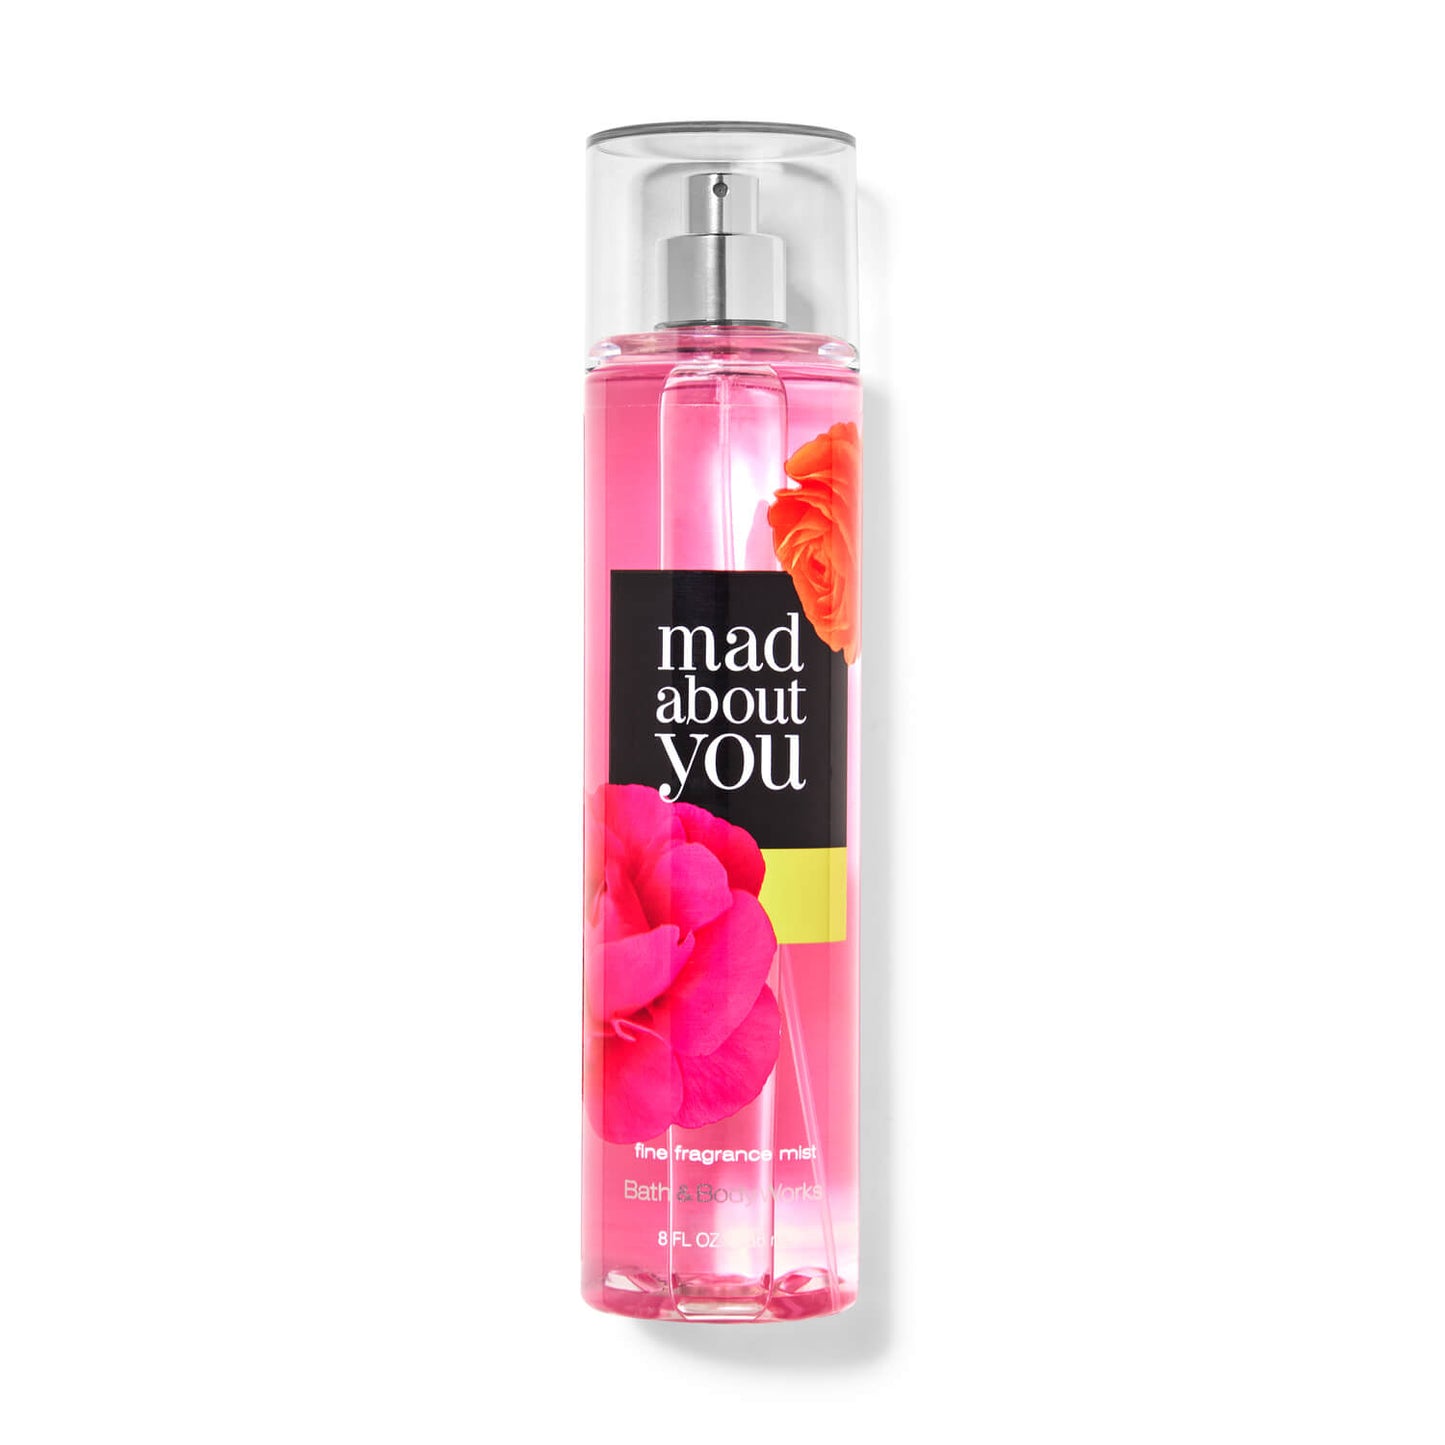 shop bath and body works fragrance mist in mad about you fragrance available at Heygirl.pk for delivery in Pakistan